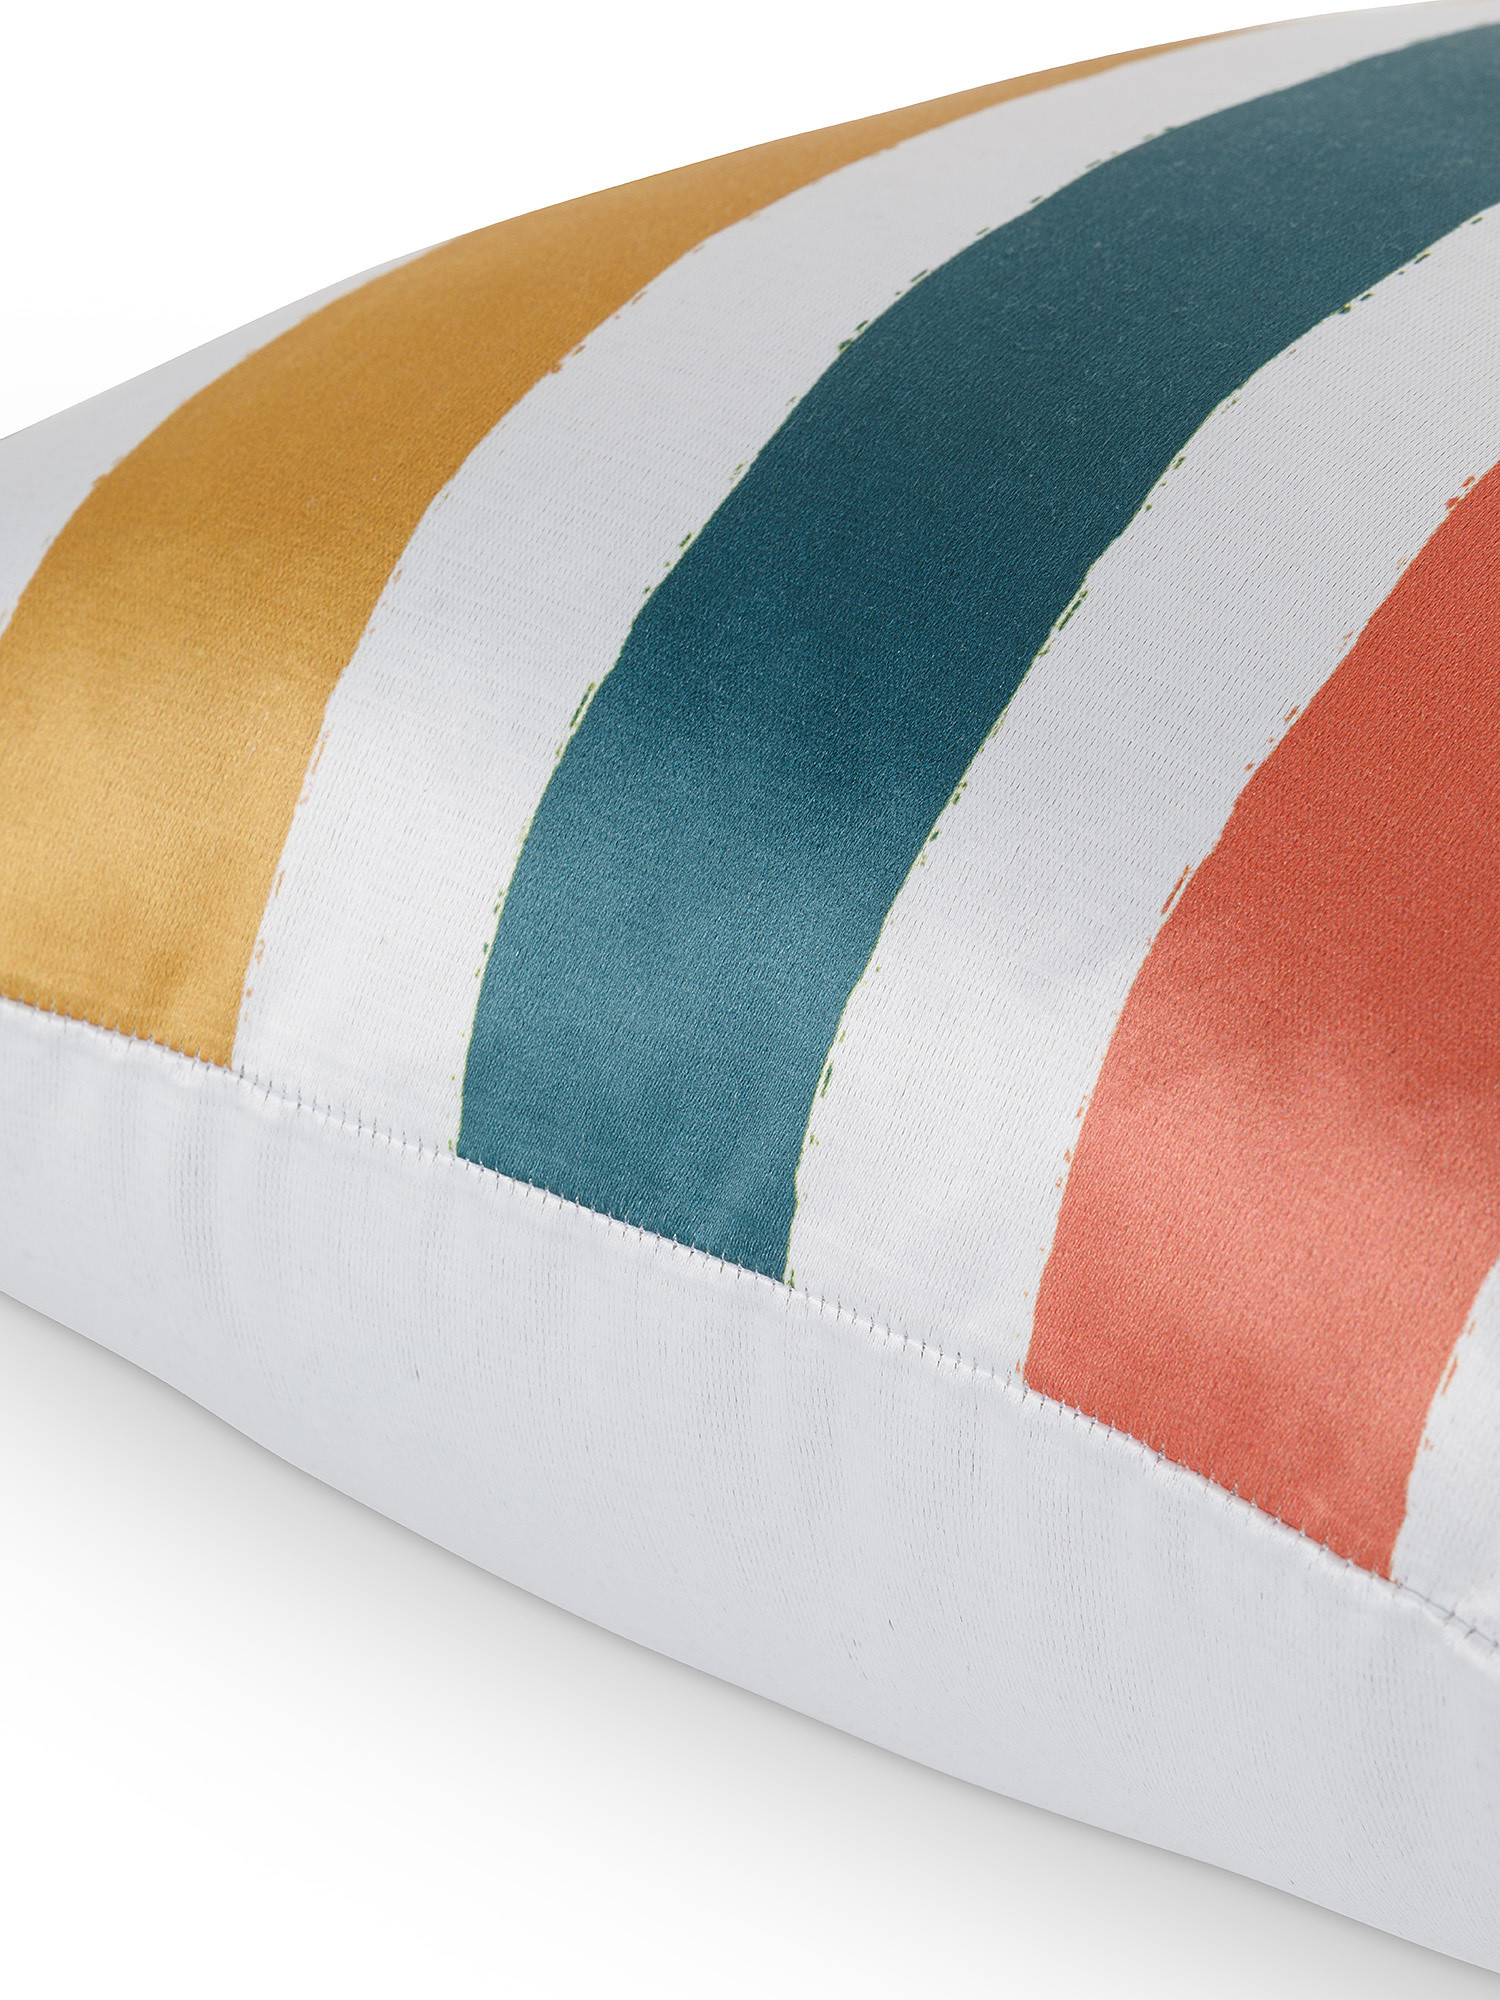 Striped satin effect cushion 35x55cm, Multicolor, large image number 2